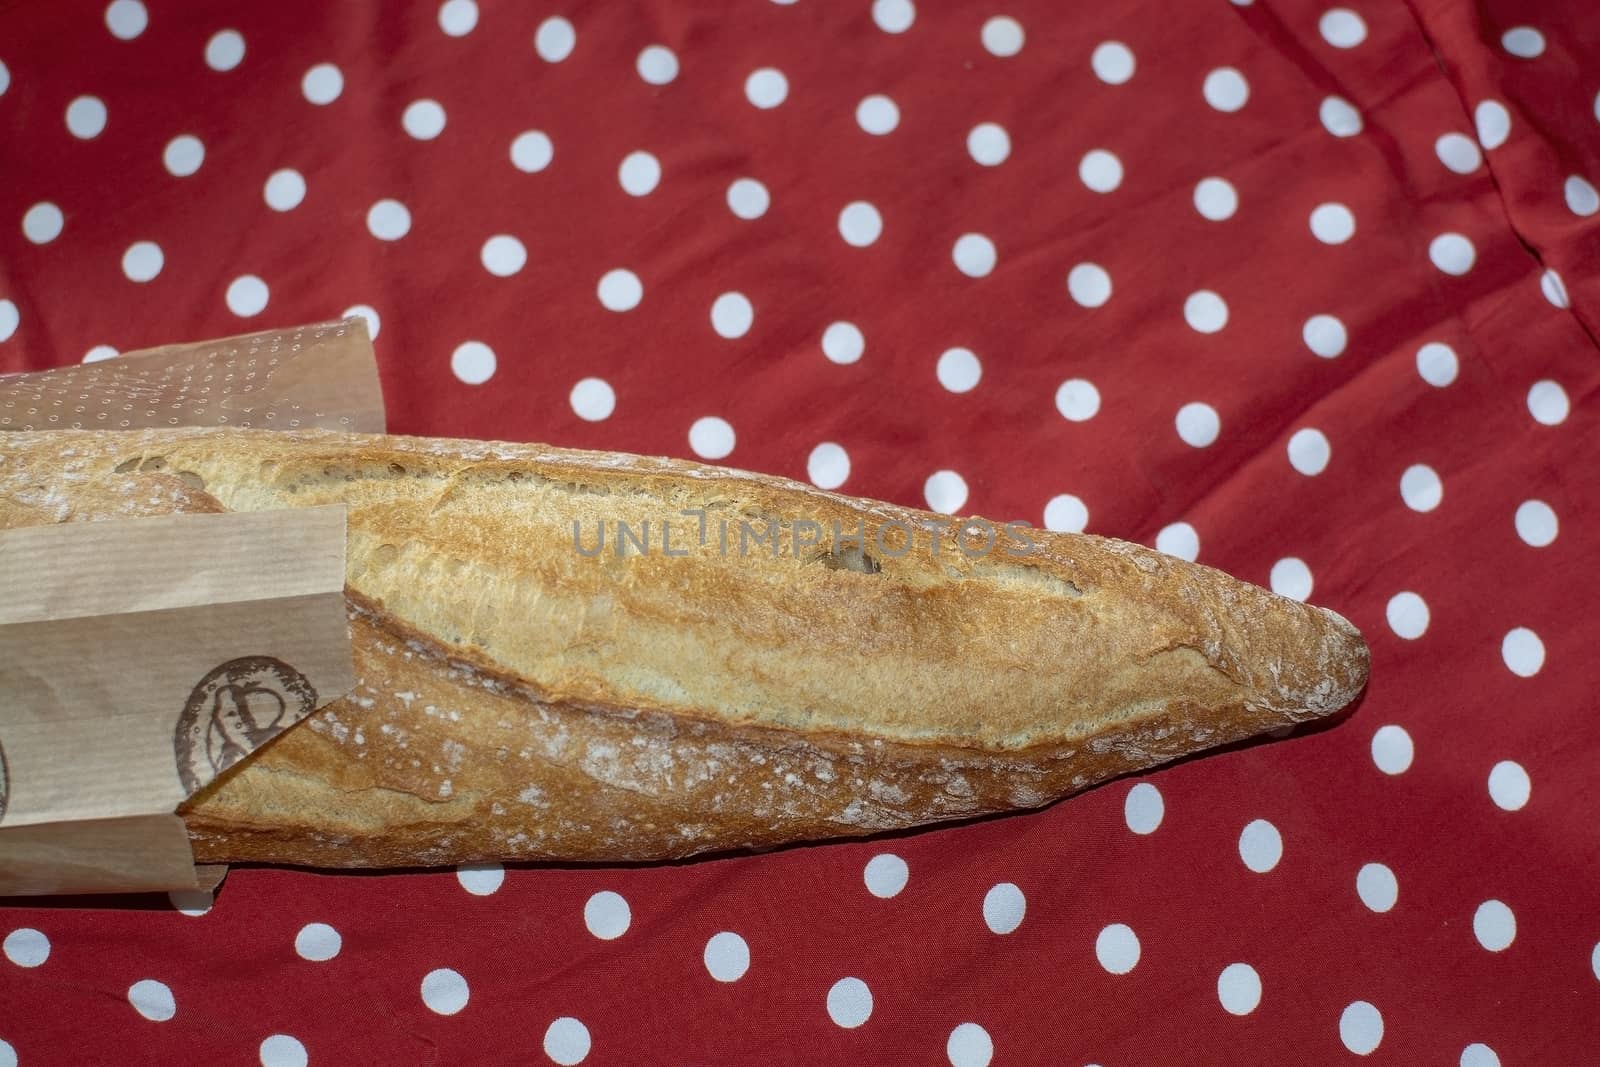 Baguette bread on red and white polka dot fabric decorative background.